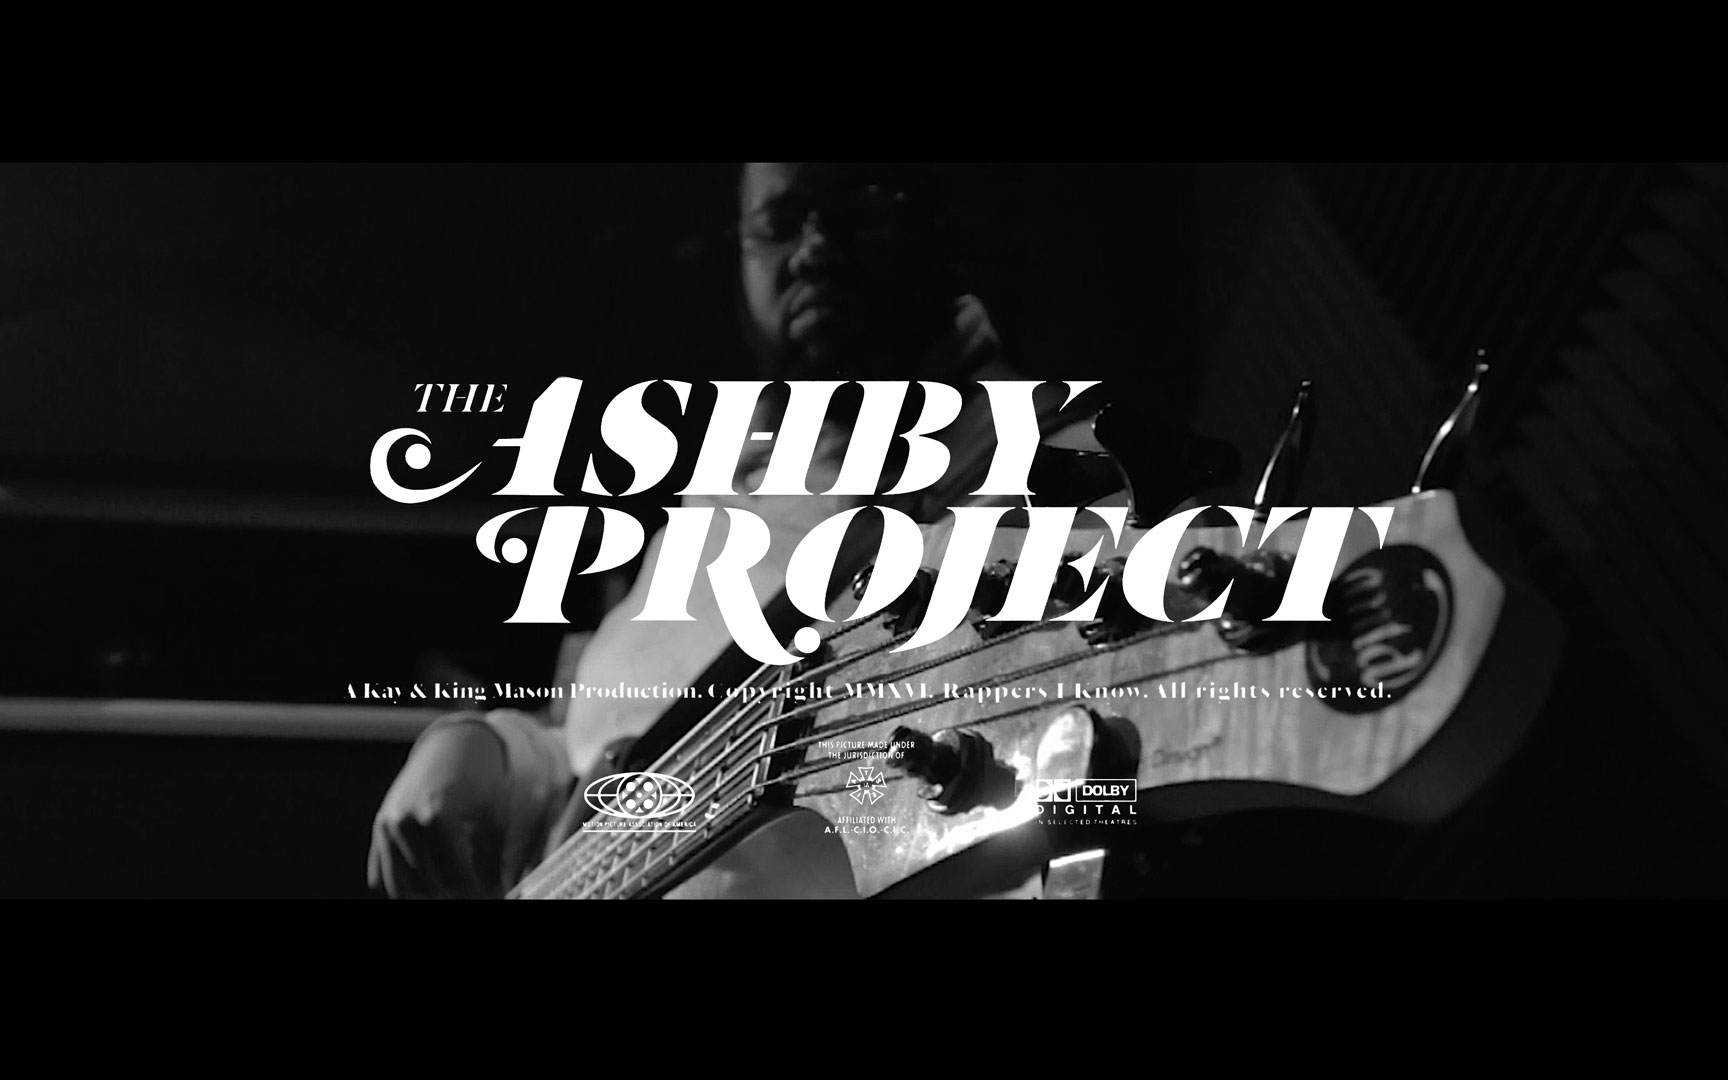 Kay & King Mason — The Ashby Project starring The Kashmere Don (Trailer 2)